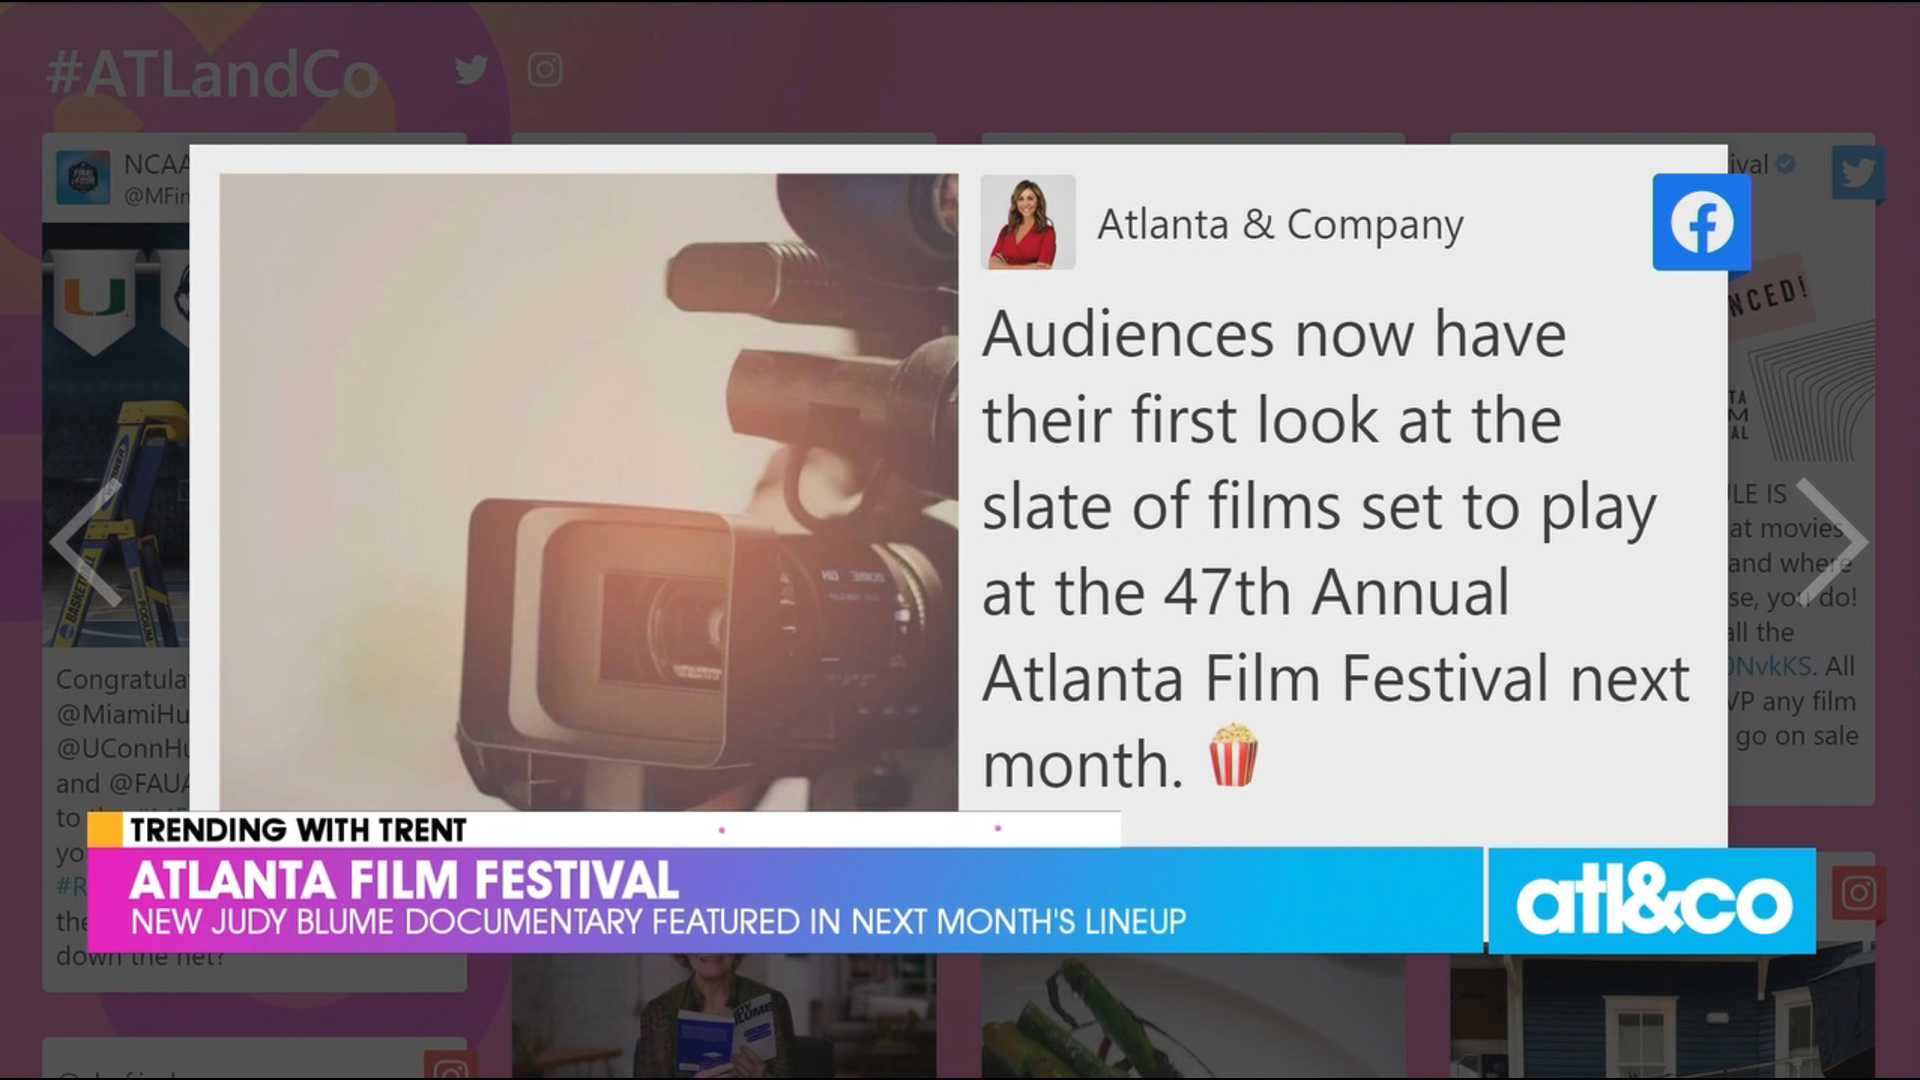 Check out the 2023 Atlanta Film Festival April 20-30 and a new Judy Blume documentary featured in their star-studded lineup.